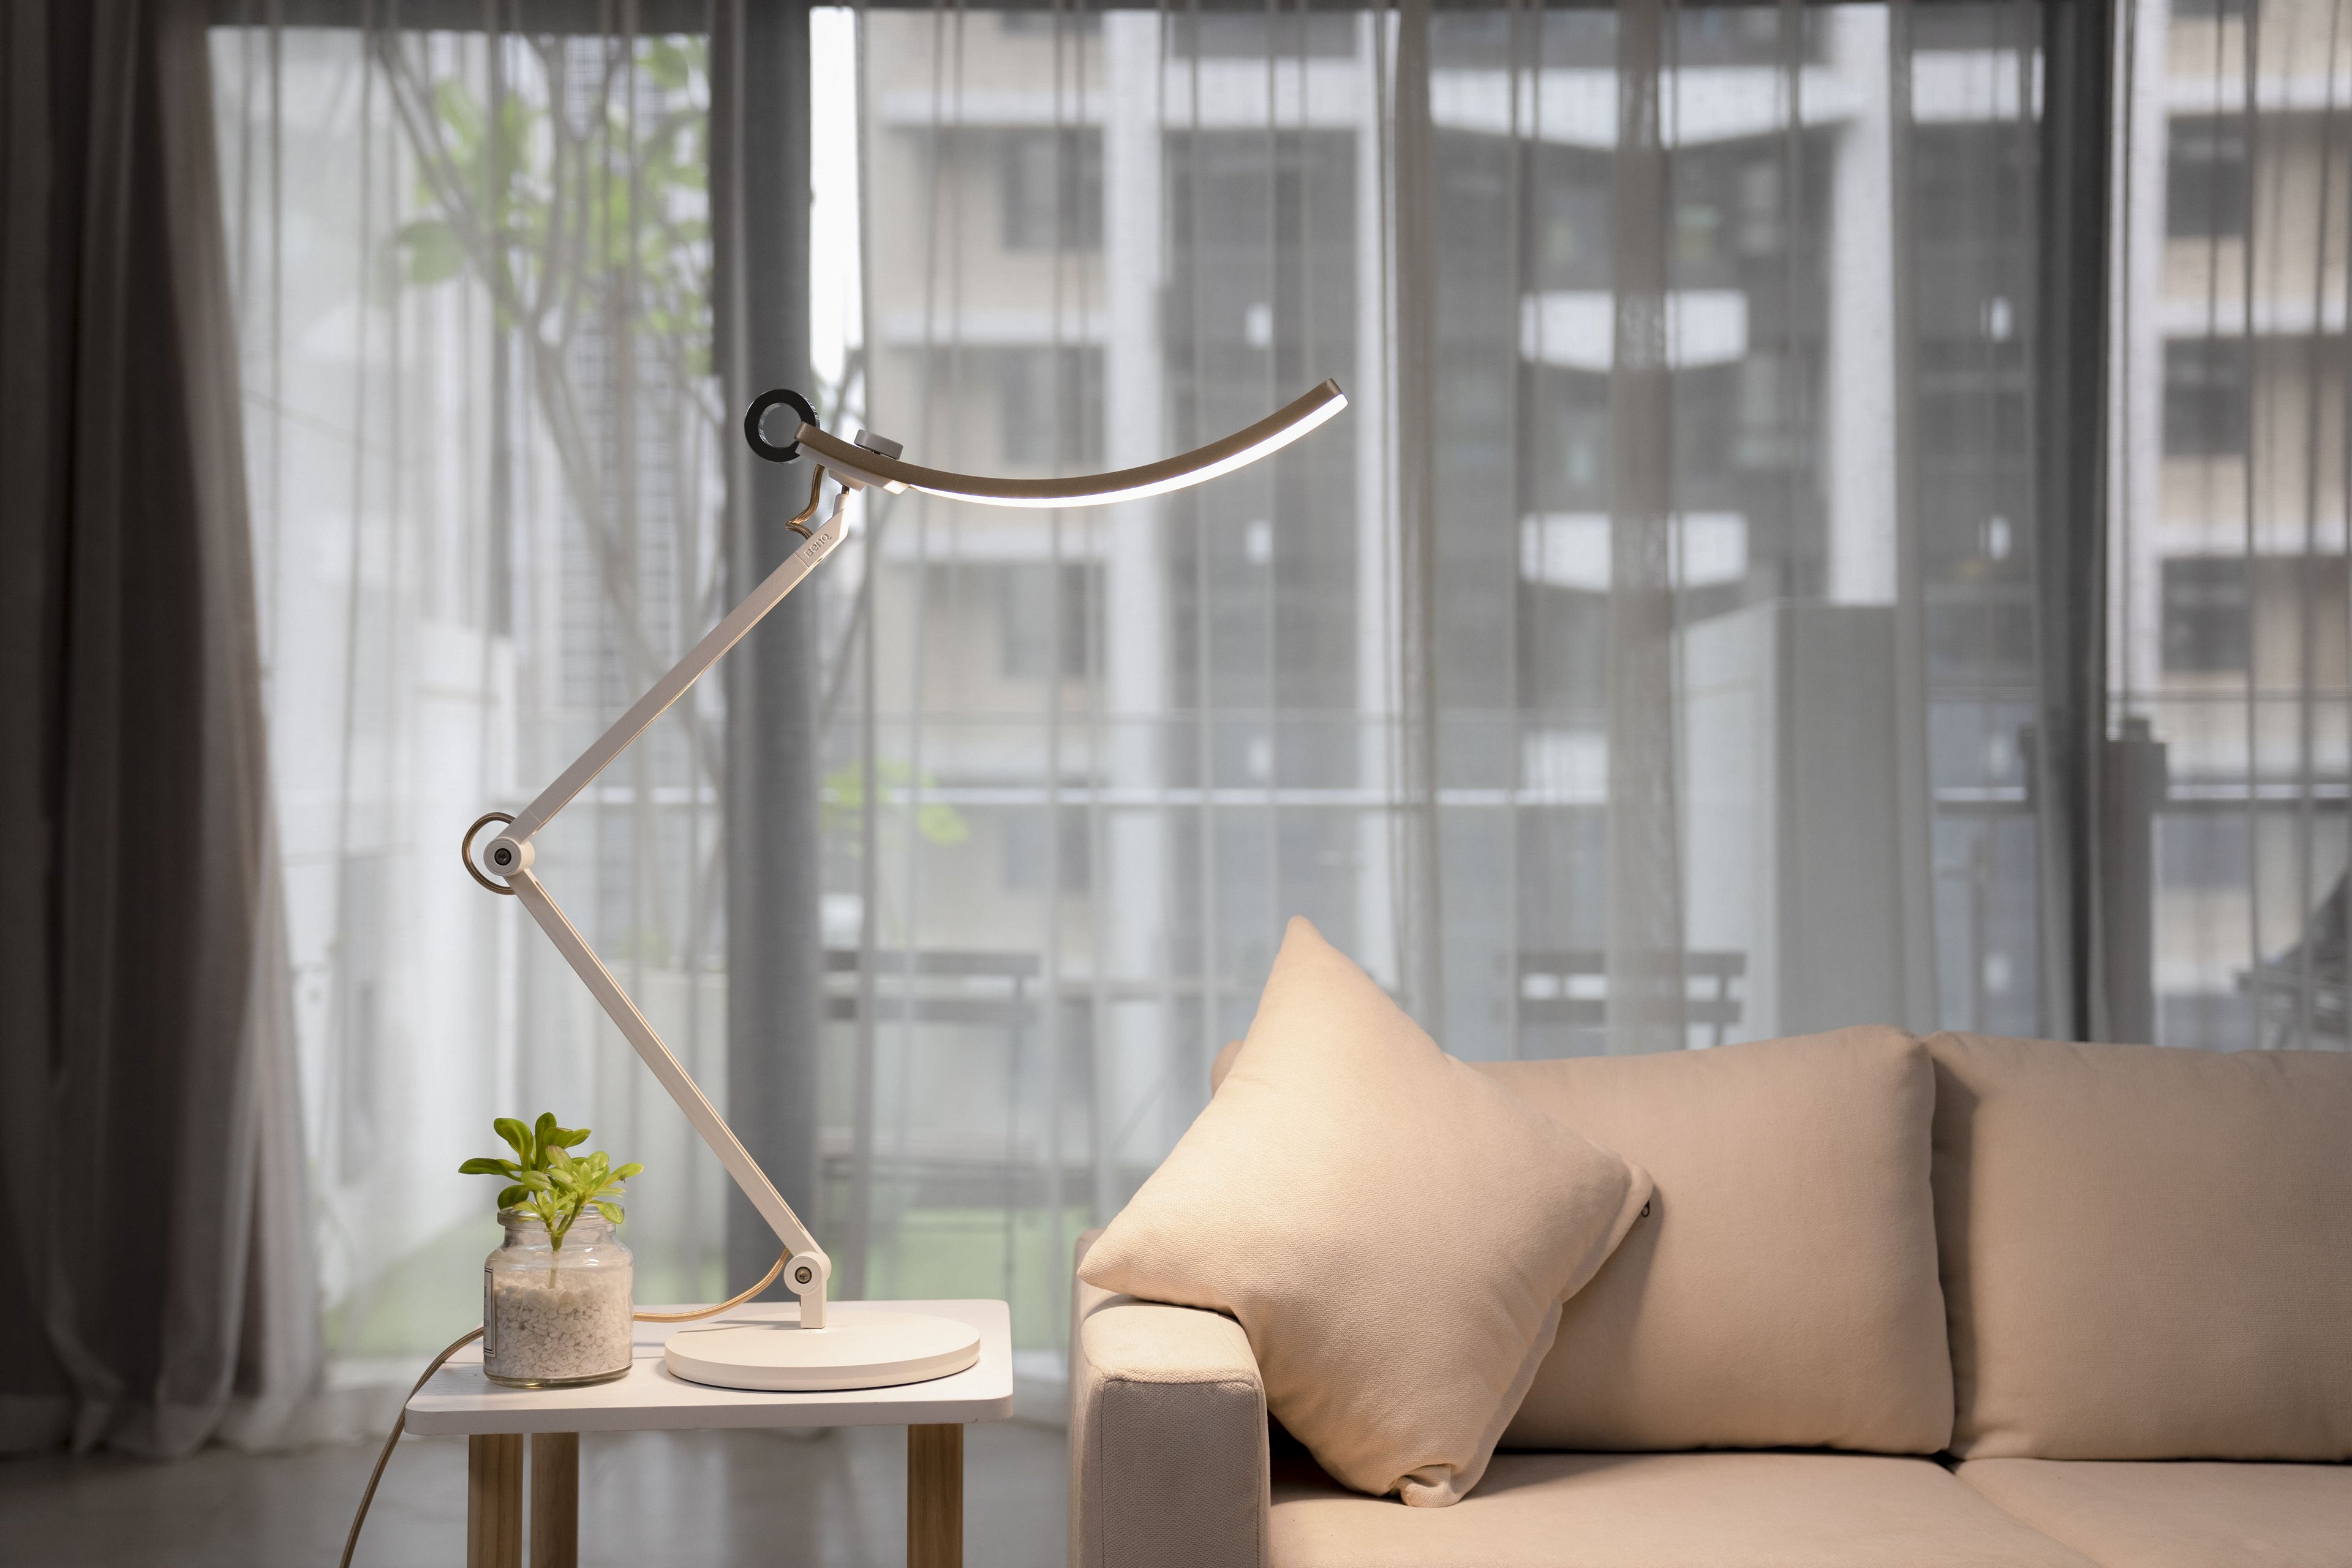 BenQ e-Reading Desk Lamp provides color-tuned lights with different intensity to build your circadian lighting.